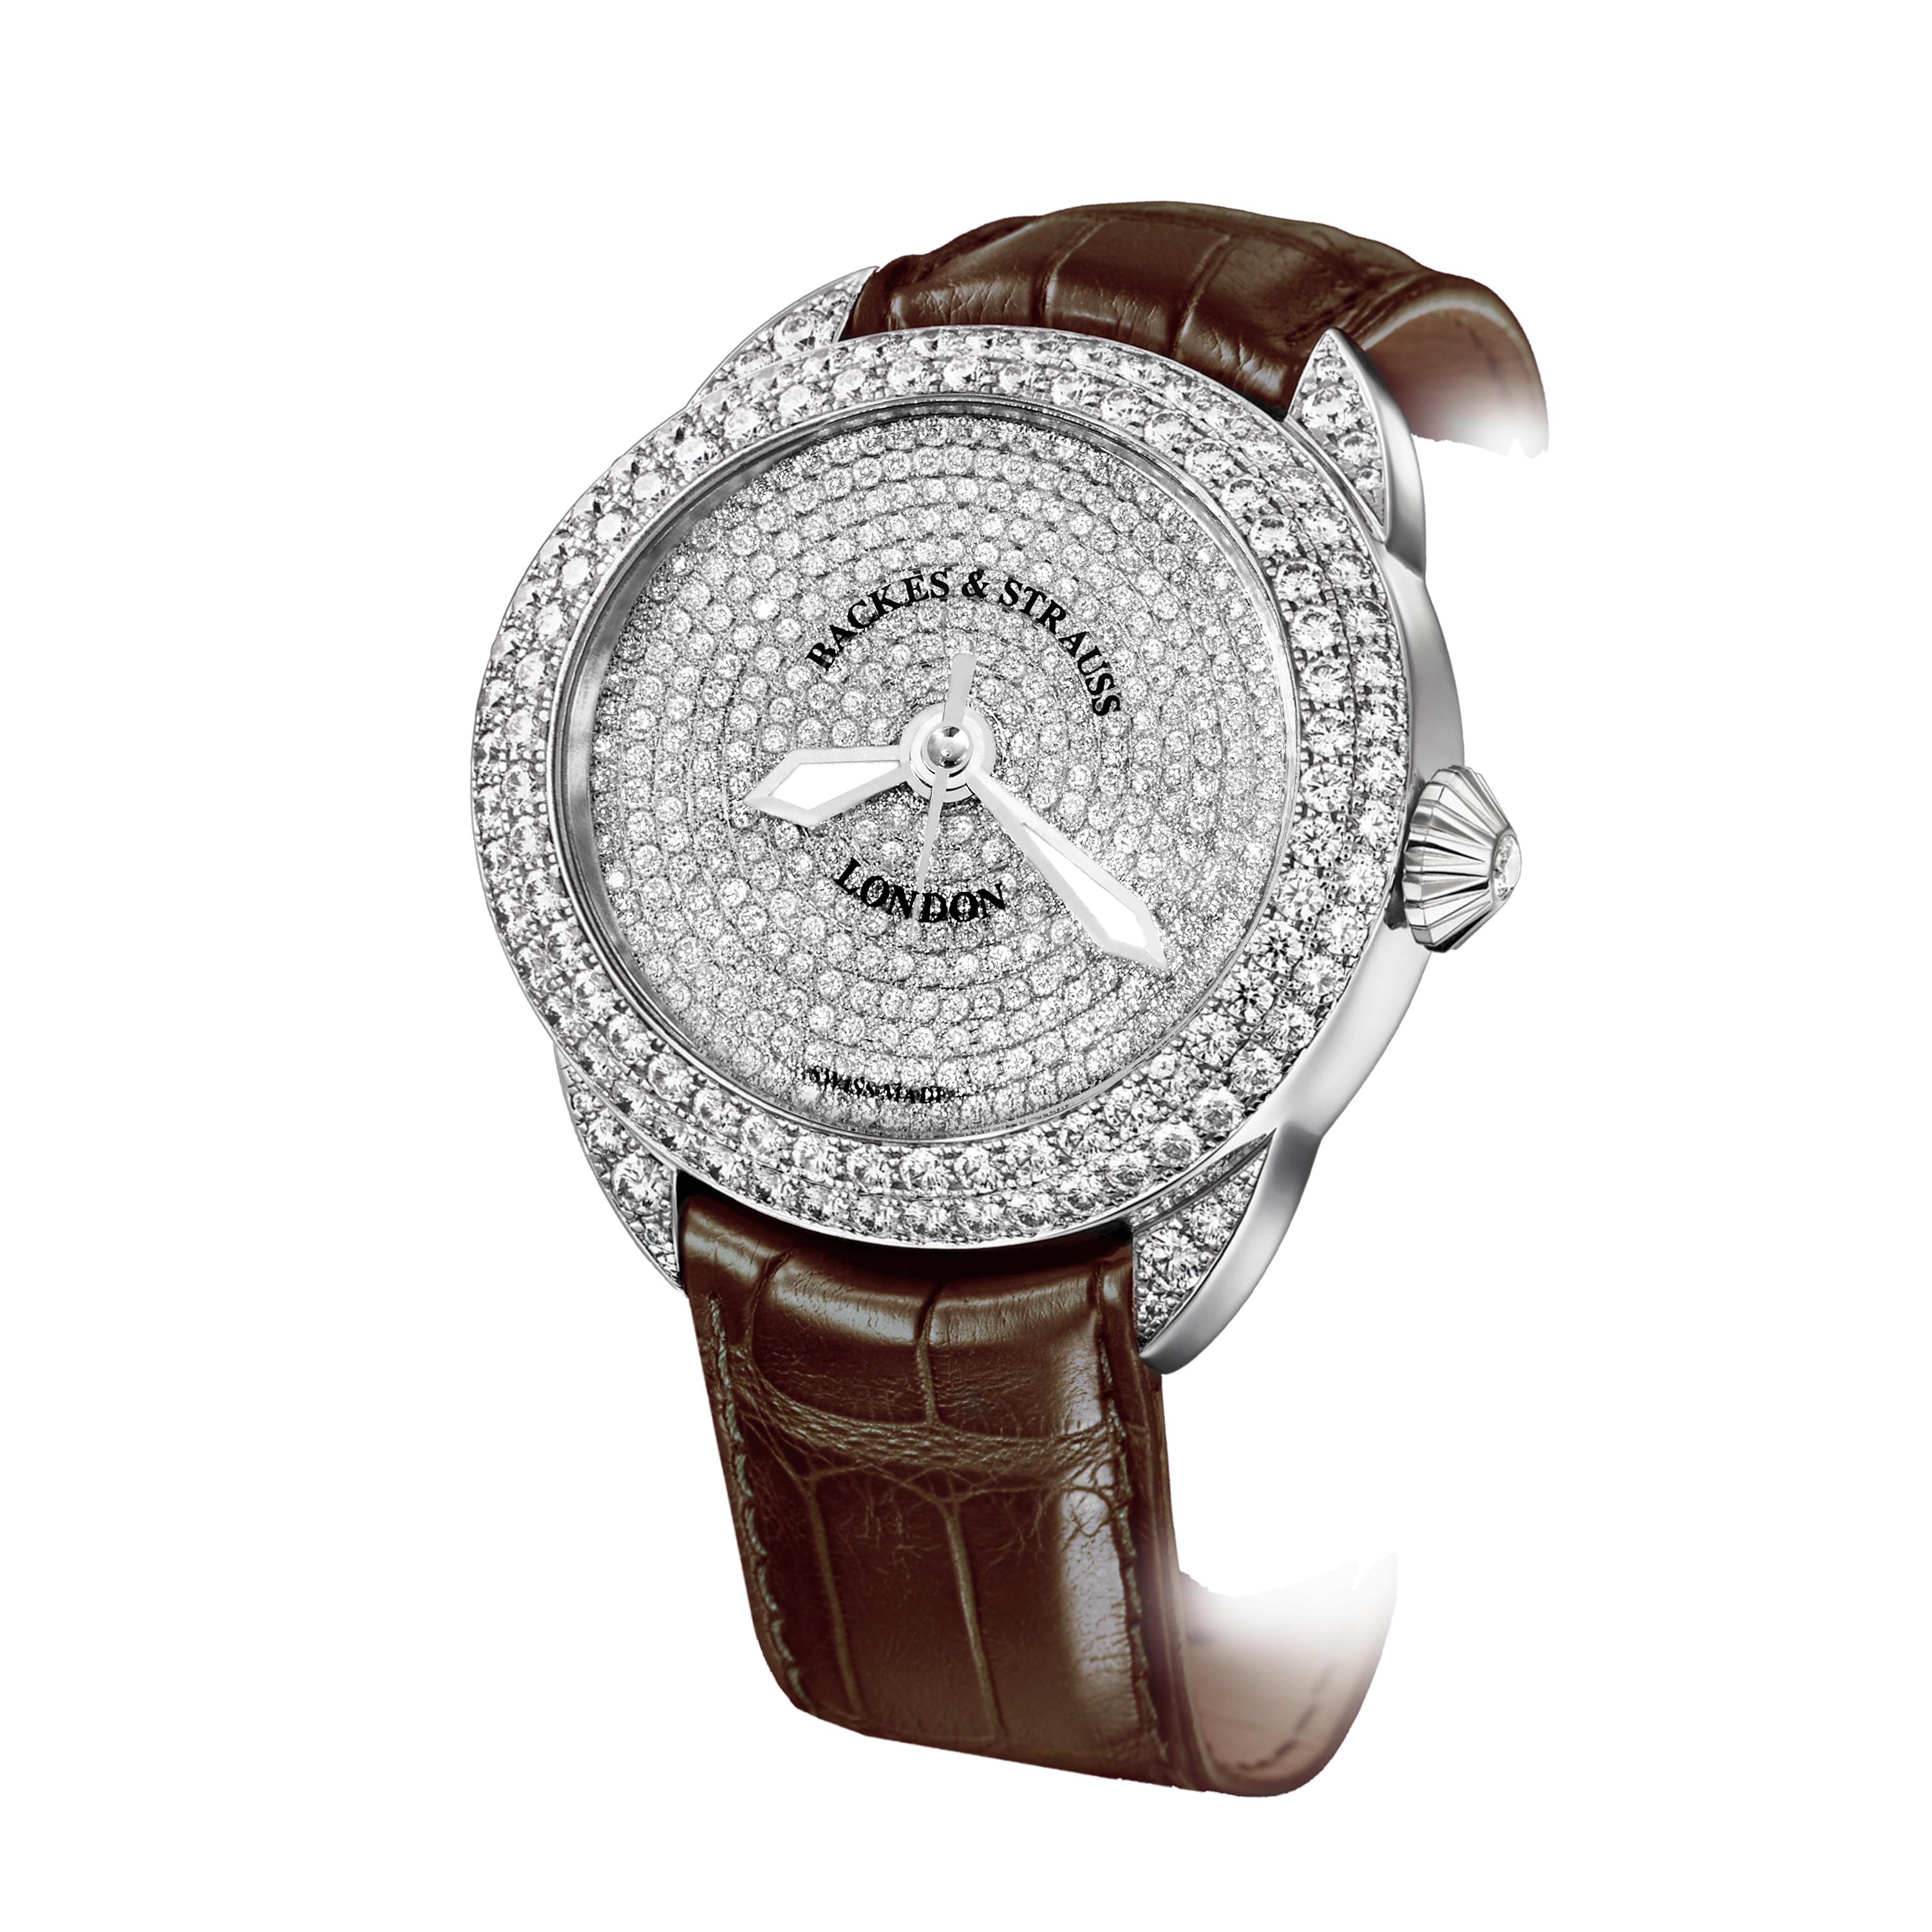 Piccadilly 45 is a luxury diamond watch for men and women crafted in 18kt White gold, featuring the fully set diamond dial with white gold Roman numerals, automatic movement. The case, dial, buckle and crown are set with white Ideal Cut diamonds. It